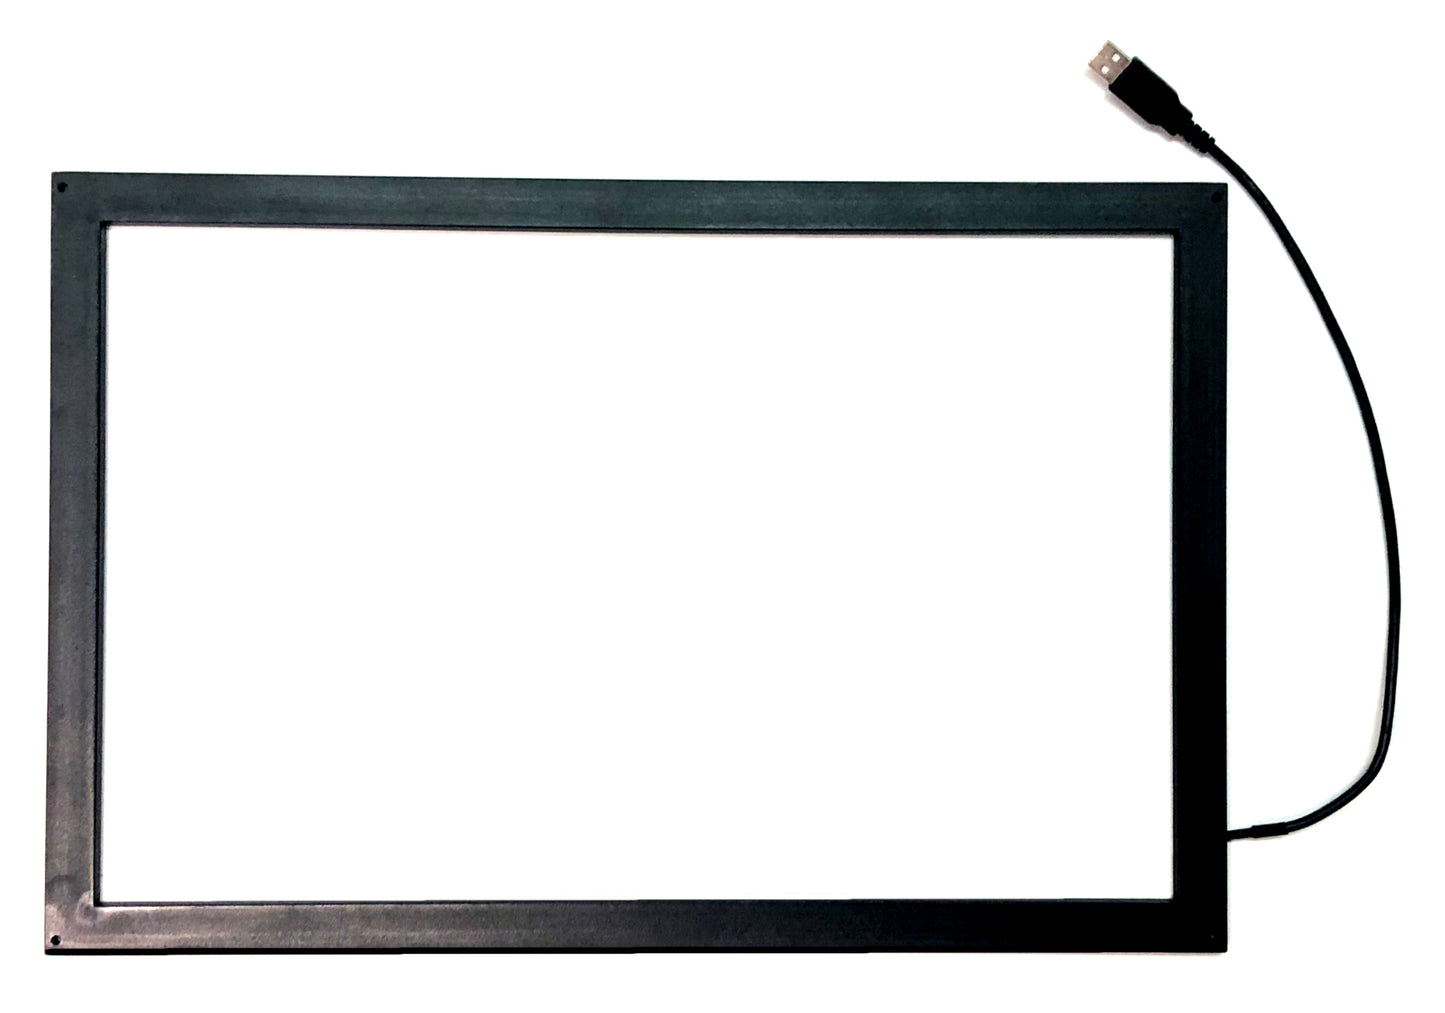 EZ-190-WAVE-CW-USB, 19" Diagonal Infrared Touch Screen Panel